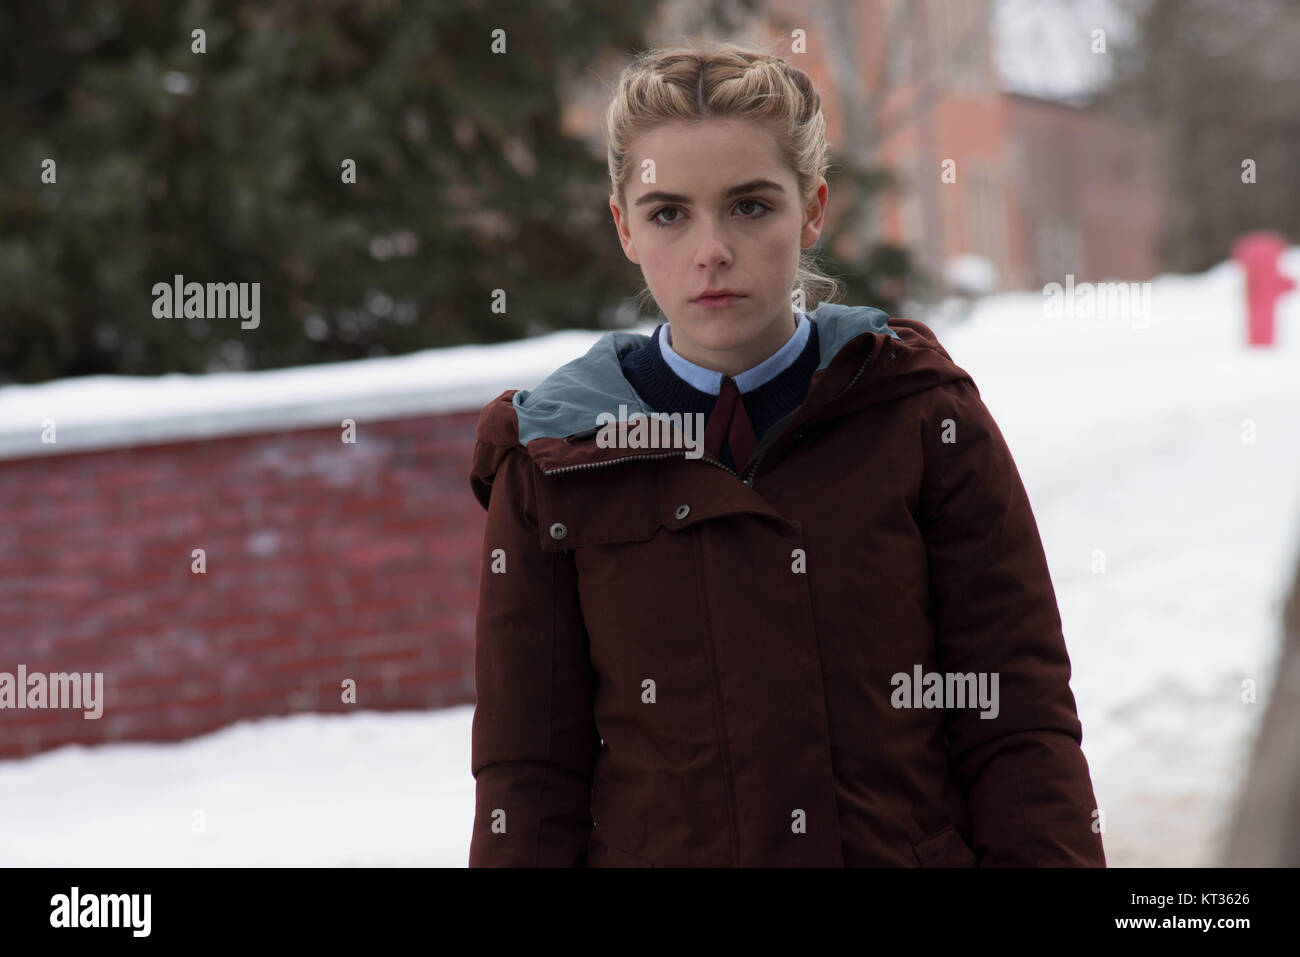 RELEASE DATE: February 16, 2017 TITLE: The Blackcoat's Daughter STUDIO: Unbroken Pictures DIRECTOR: Oz Perkins PLOT: Two girls must battle a mysterious evil force when they get left behind at their boarding school over winter break. STARRING: KIERNAN SHIPKA. (Credit Image: © Unbroken Pictures/Entertainment Pictures) Stock Photo